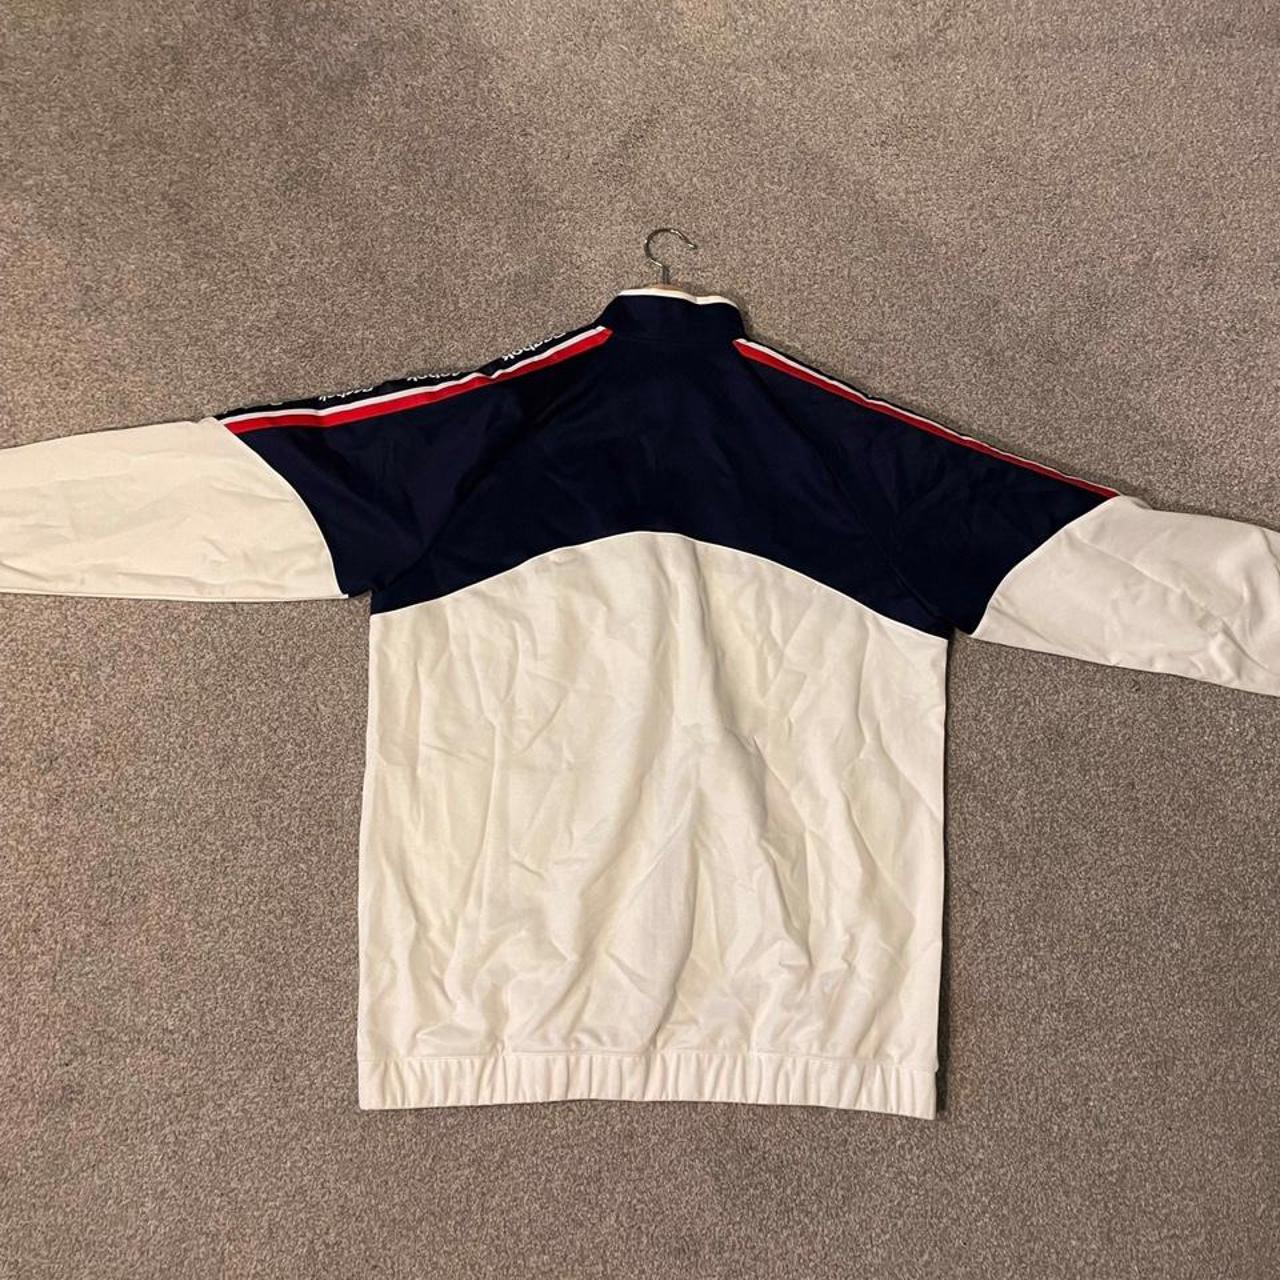 REEBOK CLASSIC VECTOR WHITE/NAVY/RED TRACK JACKET ⭐️... - Depop